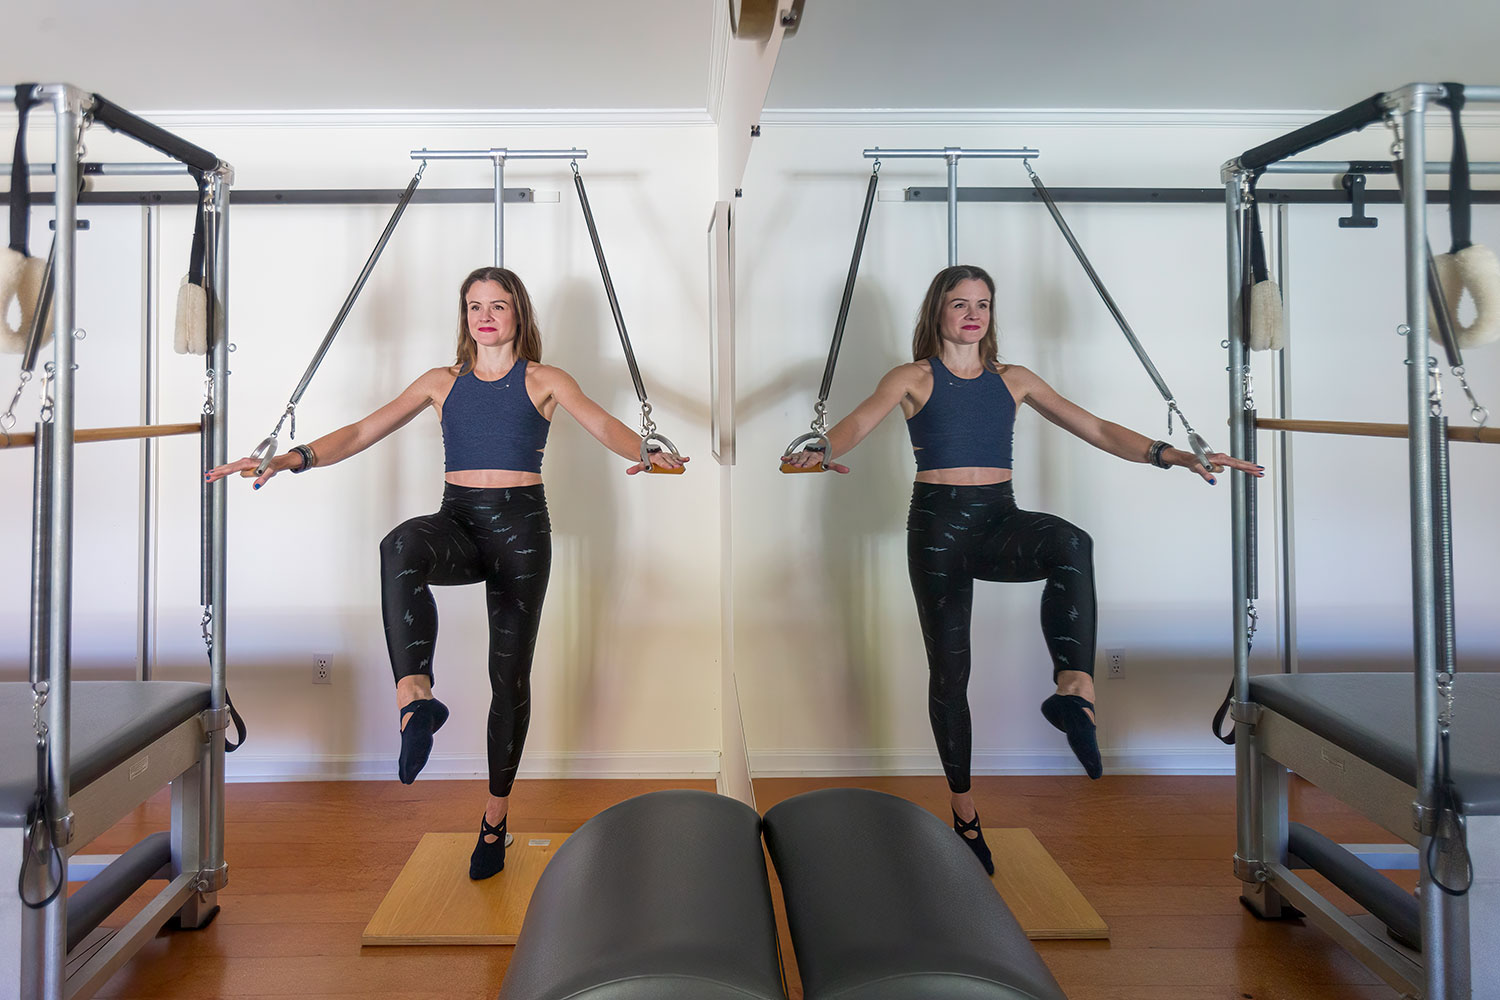 Luiza Barteldes Farinha, owner of Pilates of Luiza, gets a full-body workout with the Standing Arm Spring.